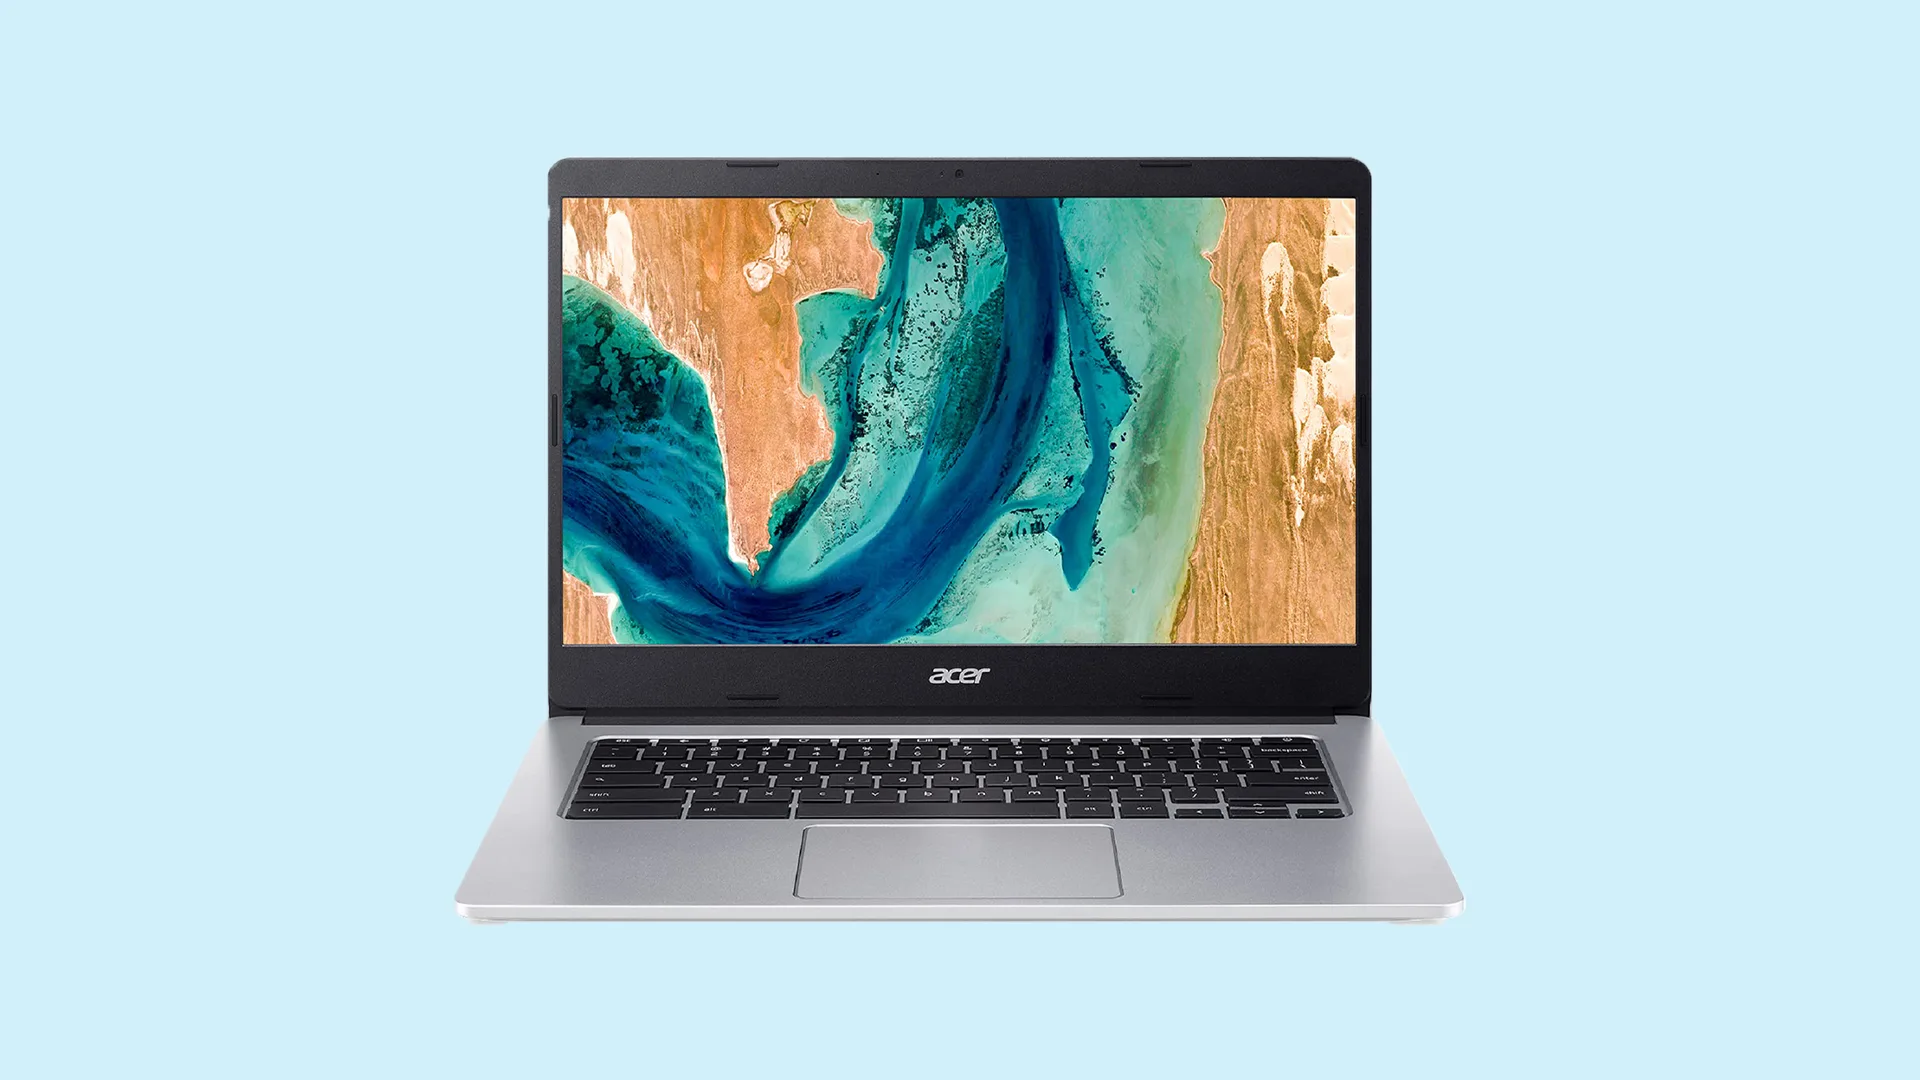 Acer Chromebook 314 - The most affordable Acer laptop